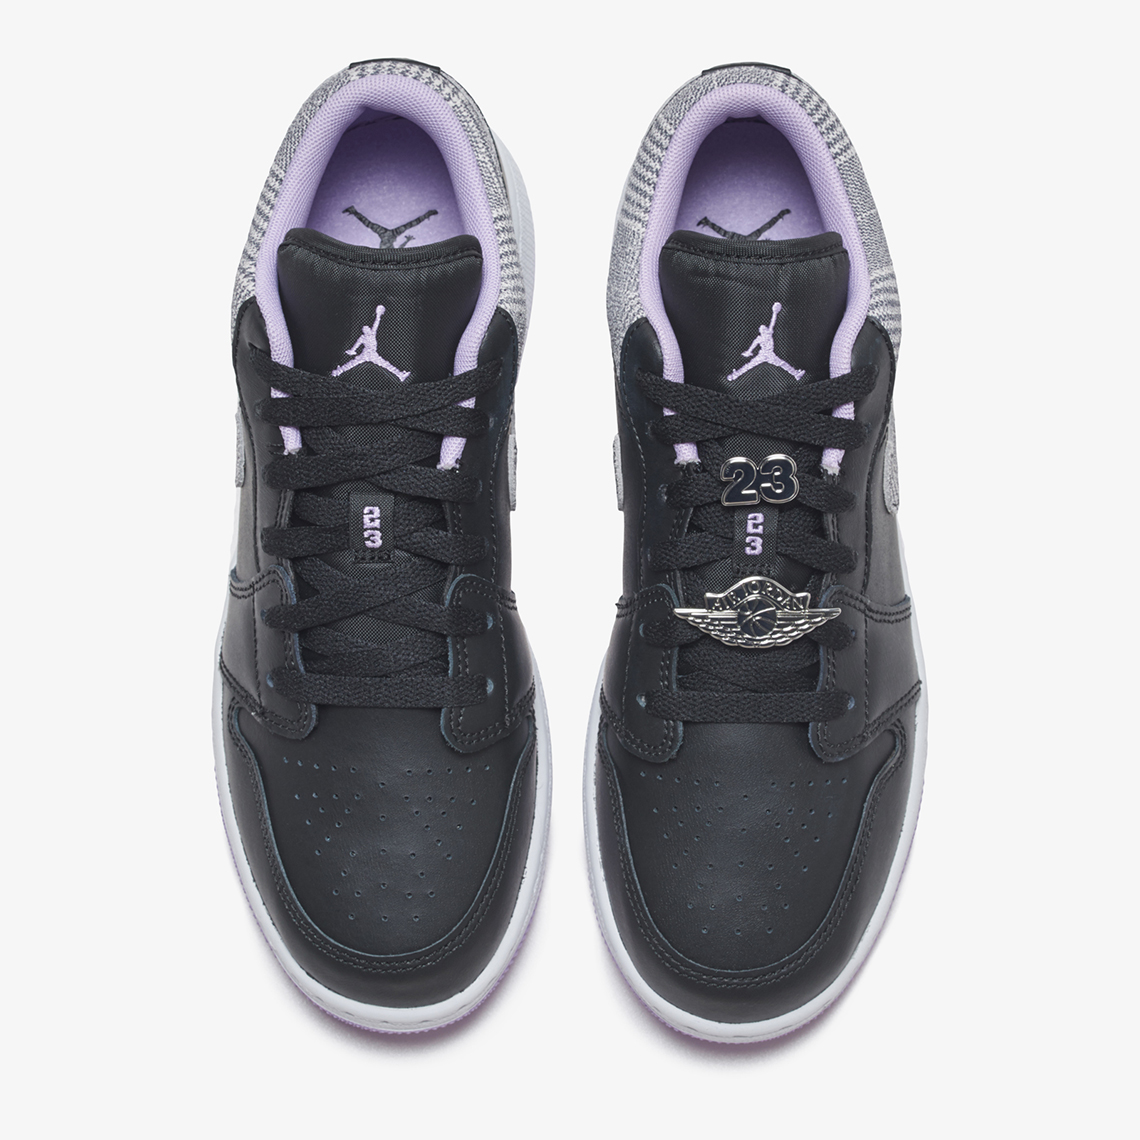 Air Jordan 1 Low Se Gs Houndstooth Lilac Dh0570 015 6